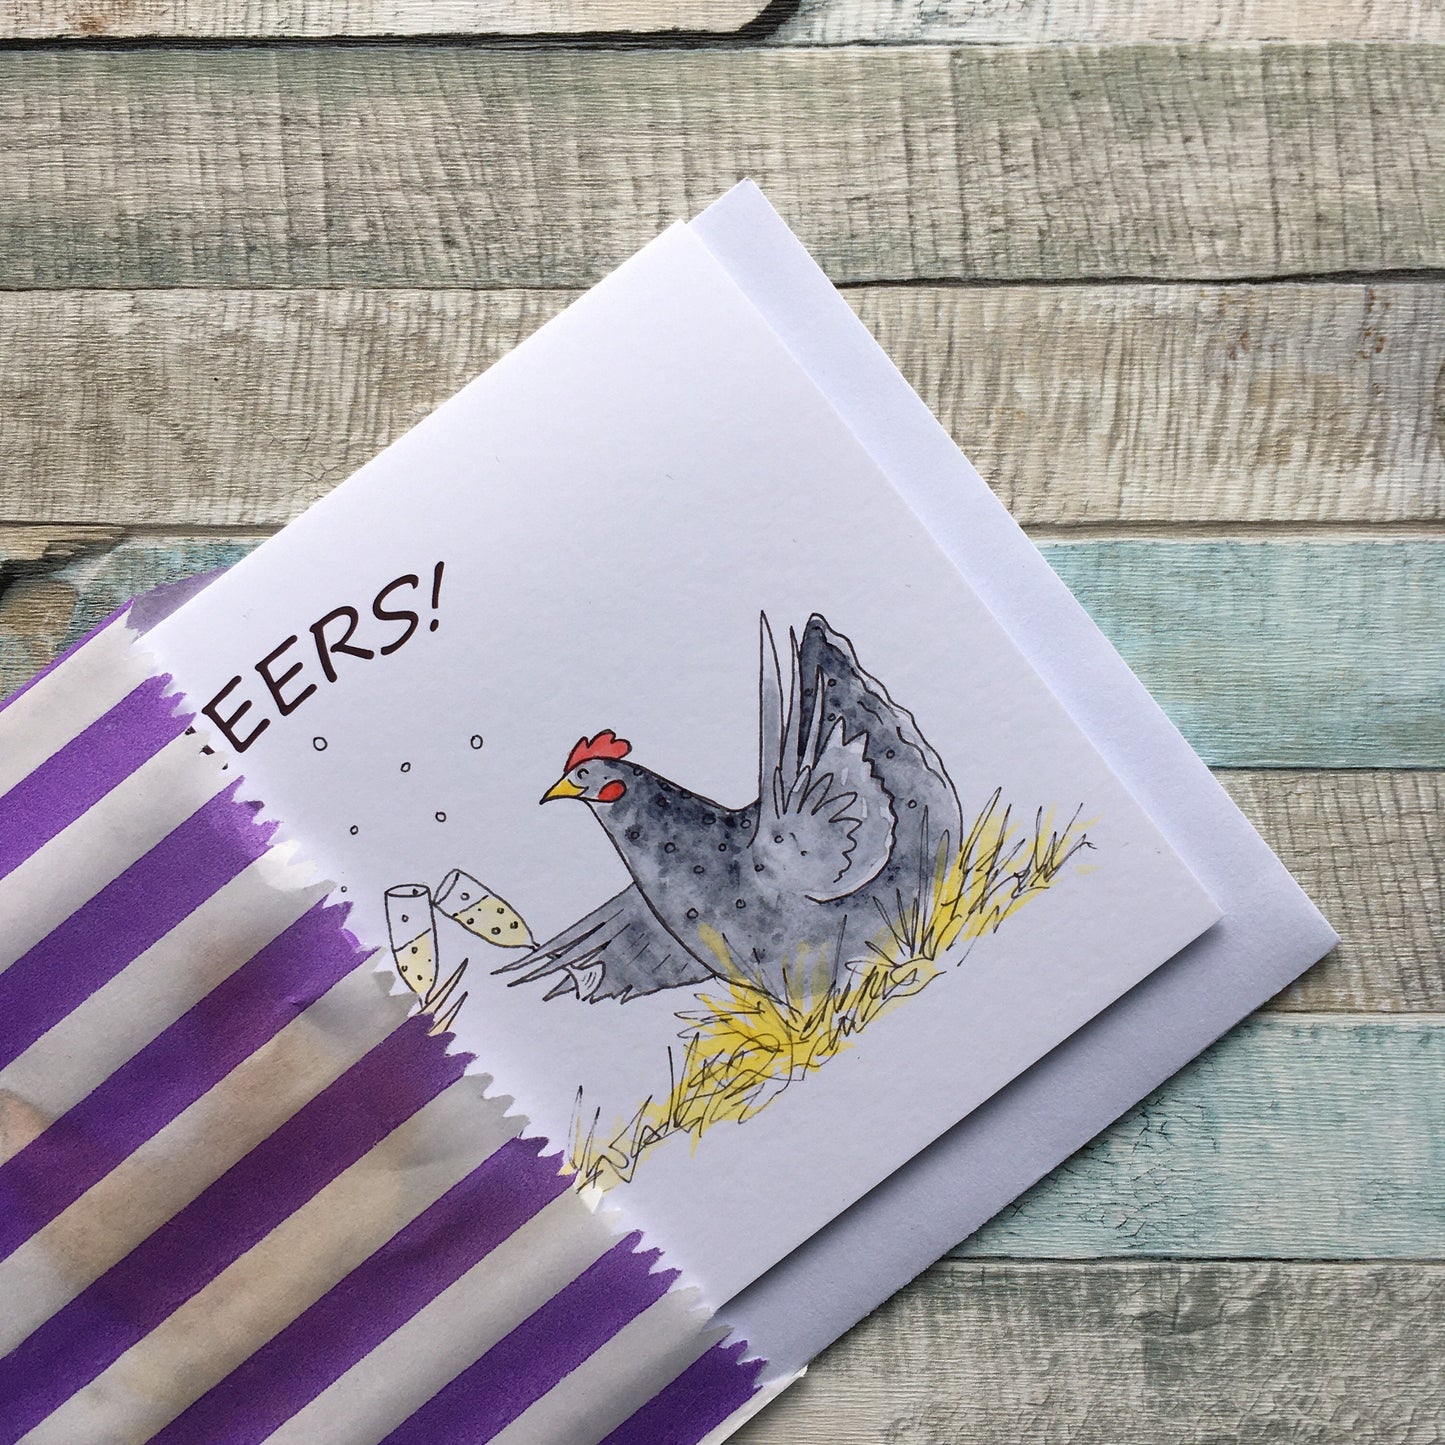 Cheers celebration chicken hen illustration blank A6 greeting card hen party congratulations well done champagne toast